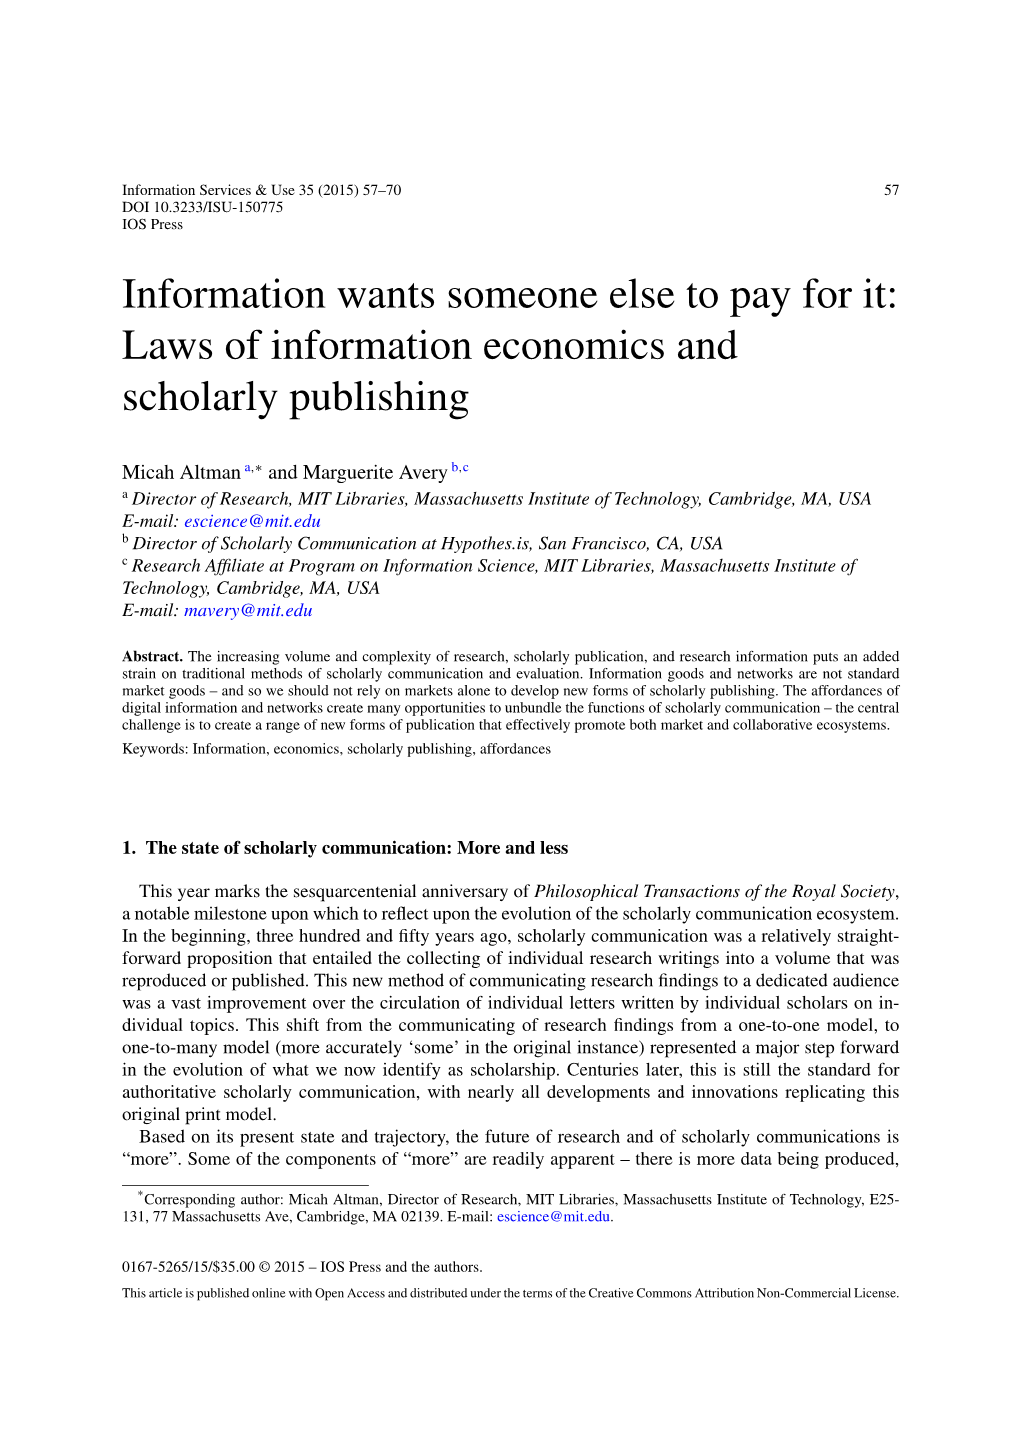 Laws of Information Economics and Scholarly Publishing